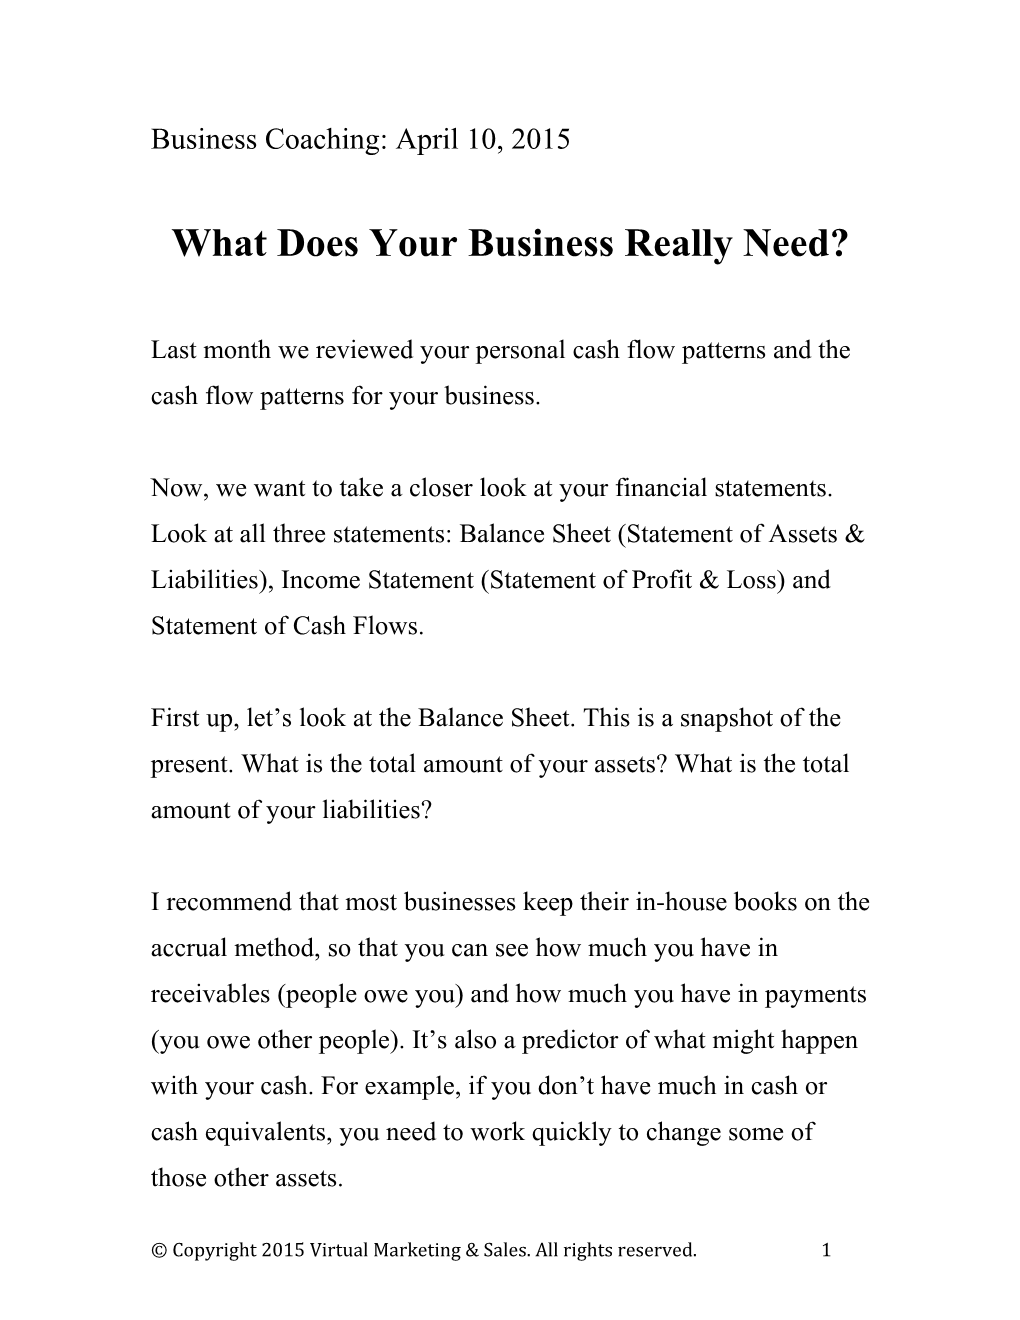 What Does Your Business Really Need?